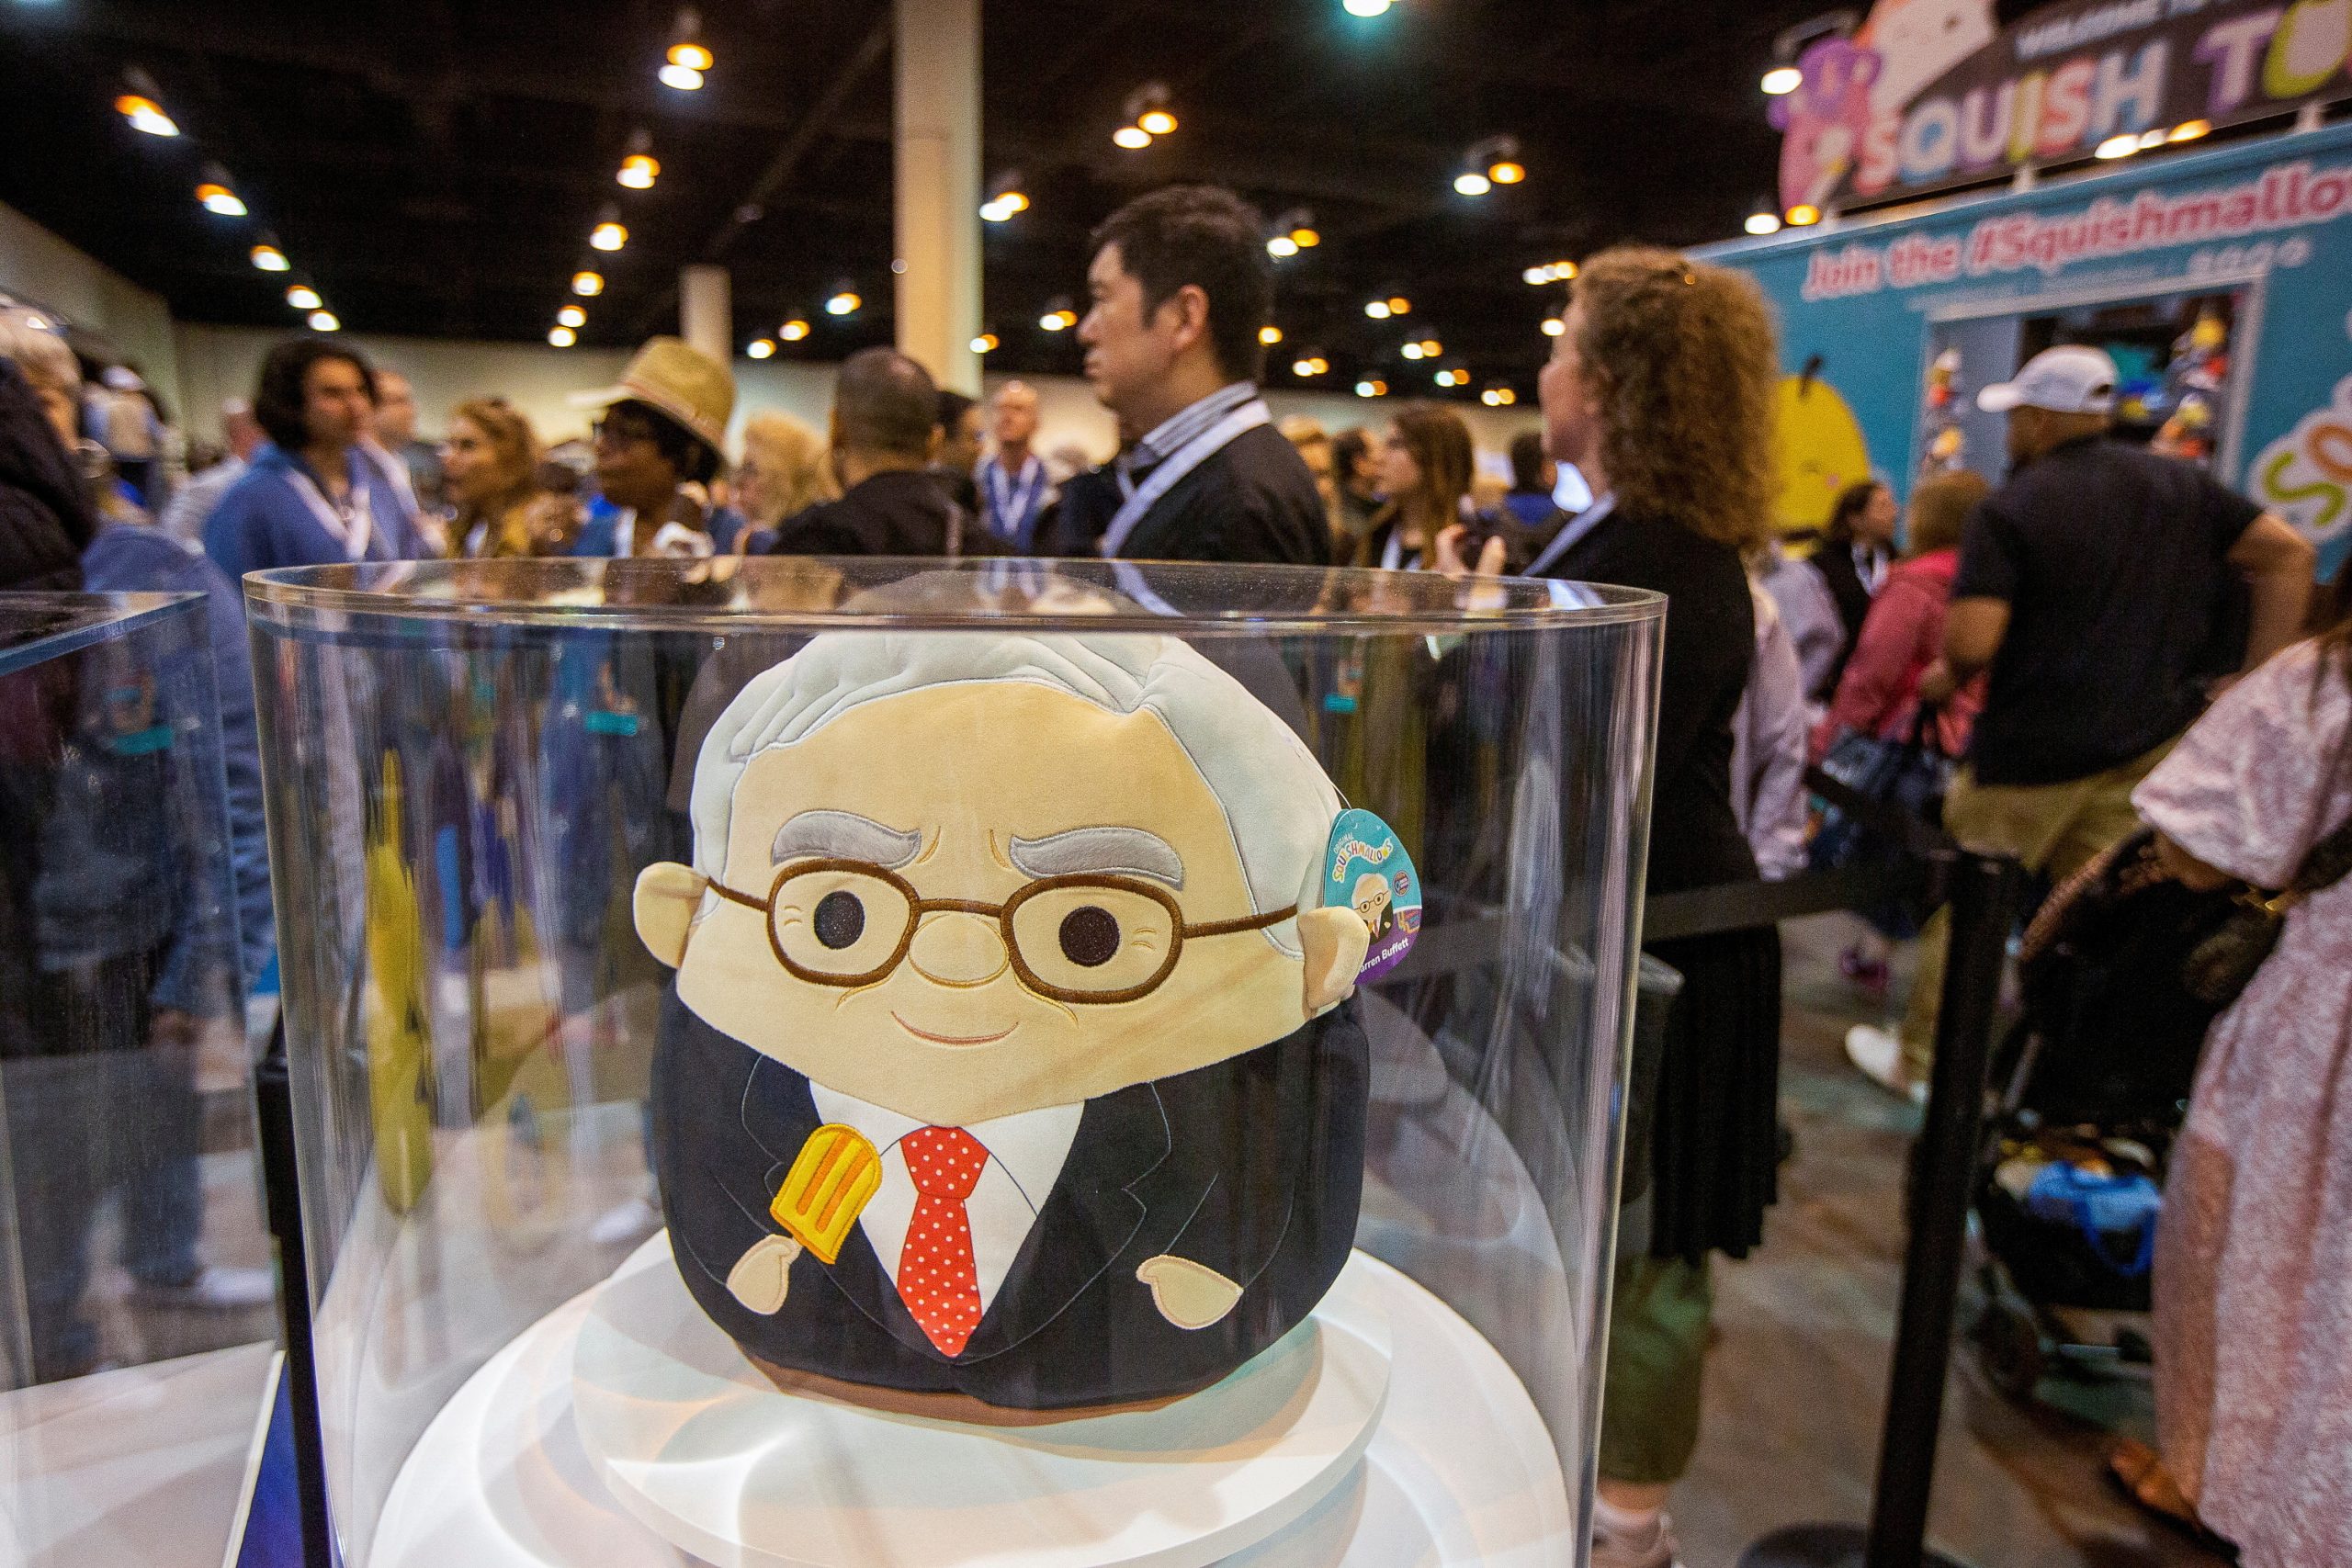 Warren Buffett's conglomerate incorporates the toy sensation that sold 100 million Squishmallows within a year